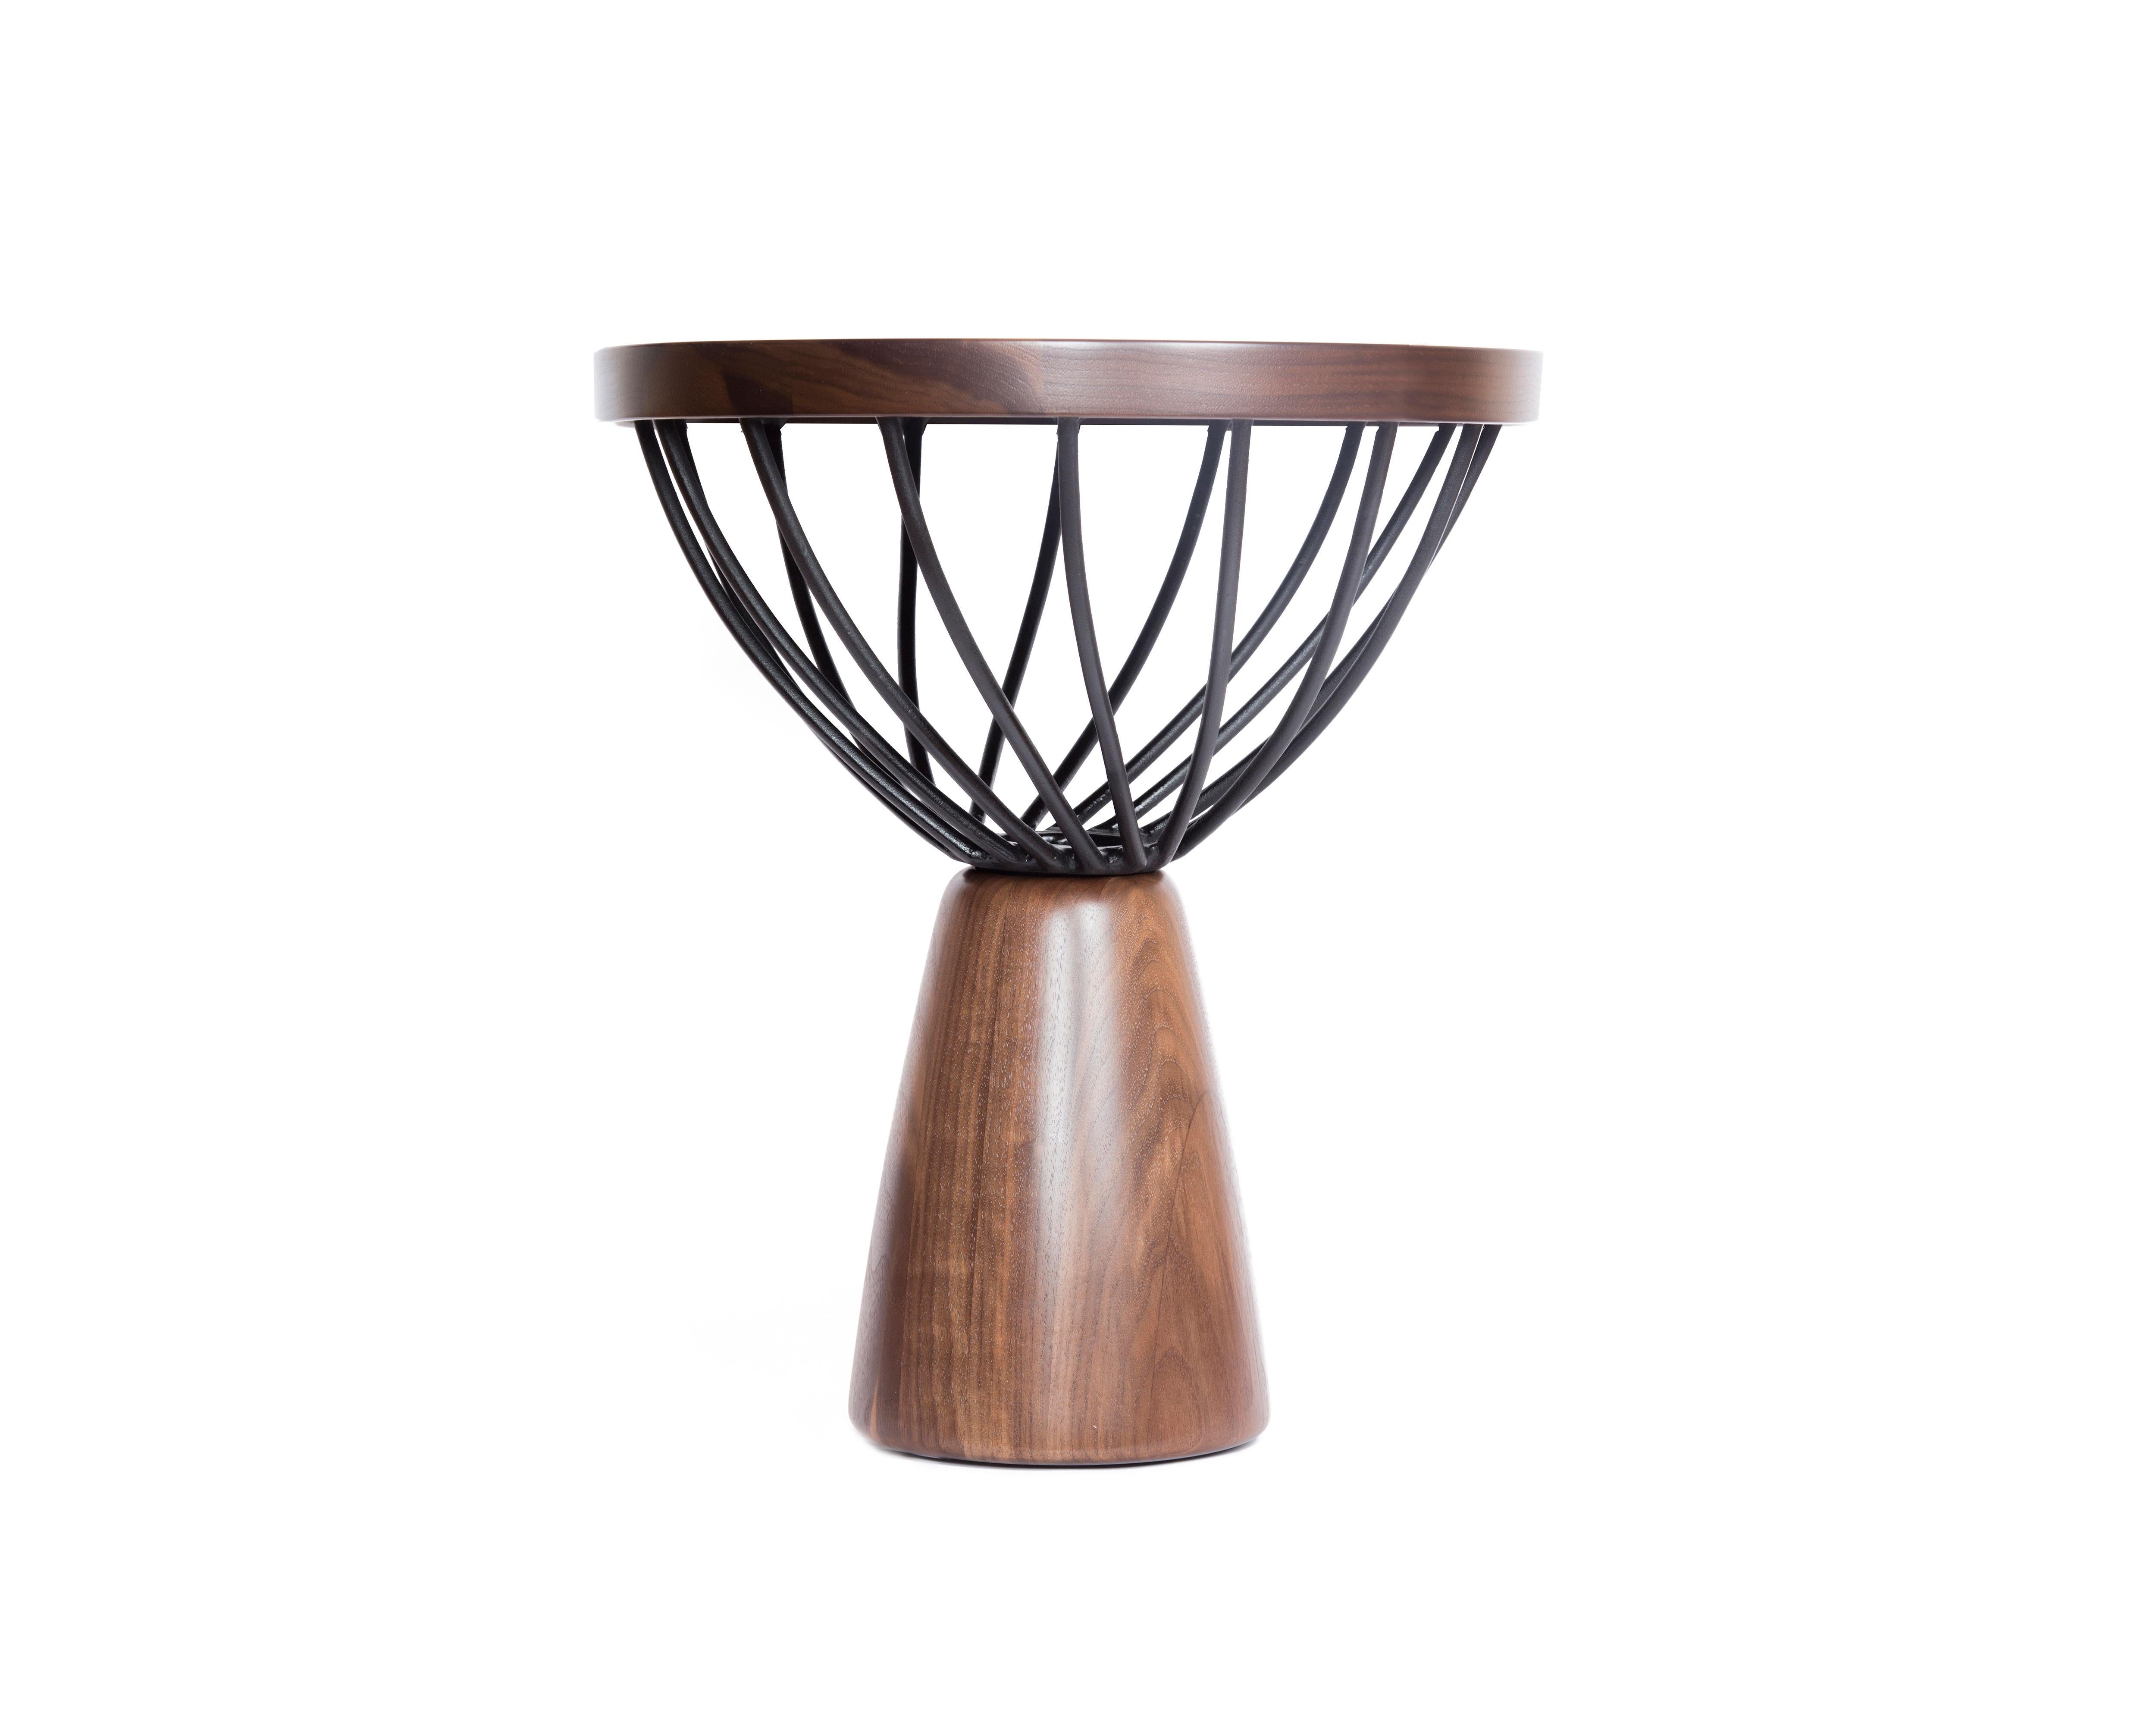 The Talking Tables were inspired by the West African Talking Drum. The Talking Drum has the ability to mimic human speech and was originally used as a communication tool. It is now commonly used in celebrations such as birthdays and weddings.
These